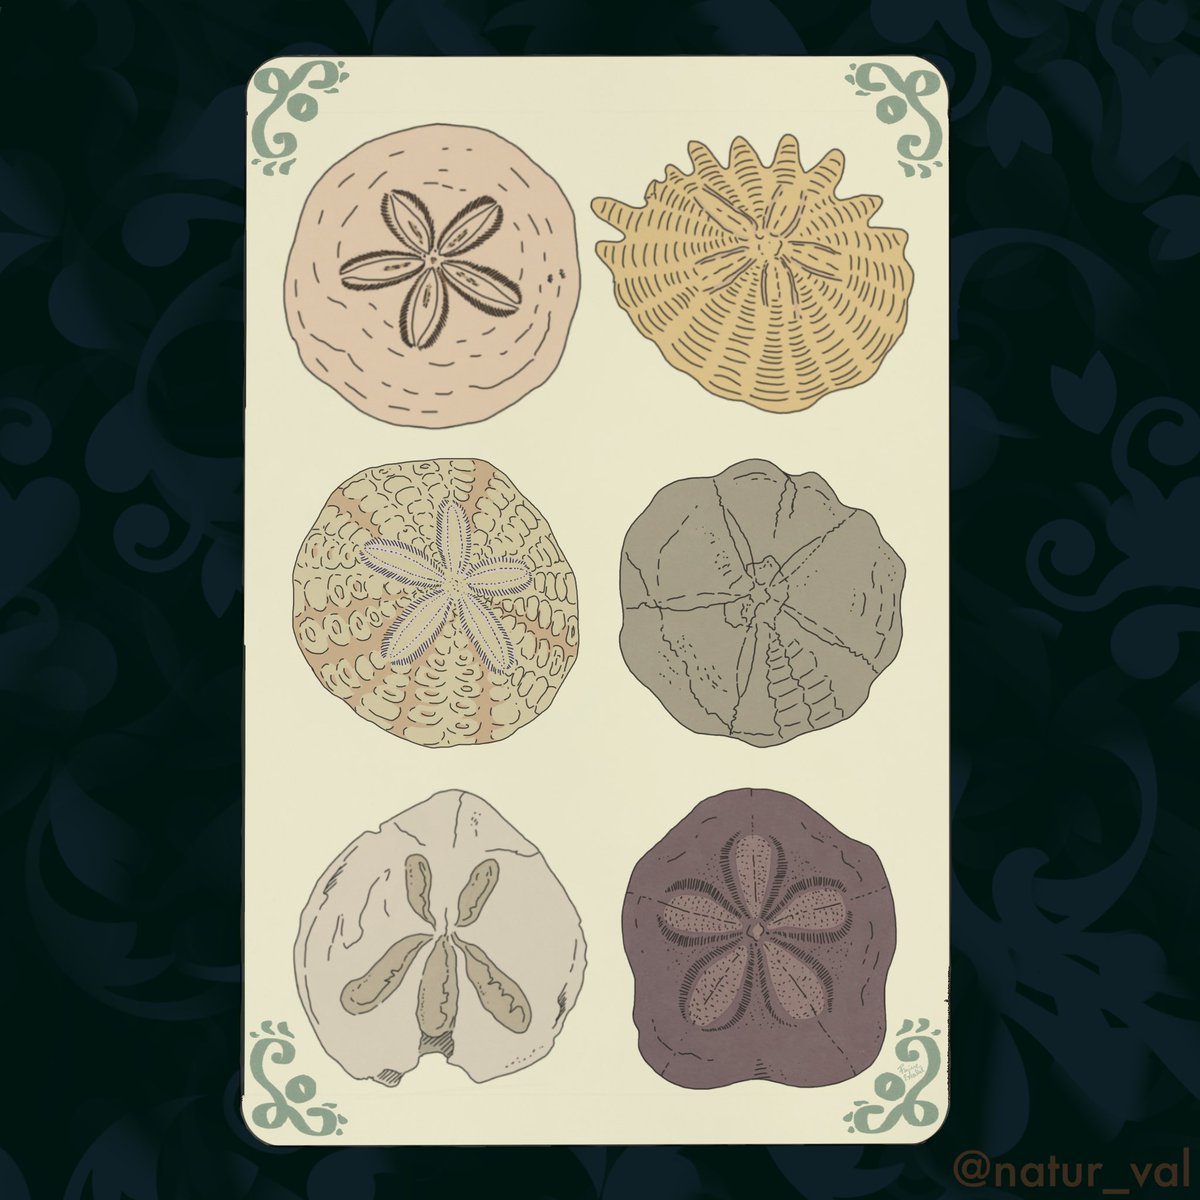 Tarots Before Time - Deniers. The suit of Pentacles. I chose “sand dollars” fossils, i.e. echinoids of the Dendrasteridae family characterized by a rounded and flattened shape that resembles a coin. P.S. There are actually a couple of interlopers from other genres 6: achievement